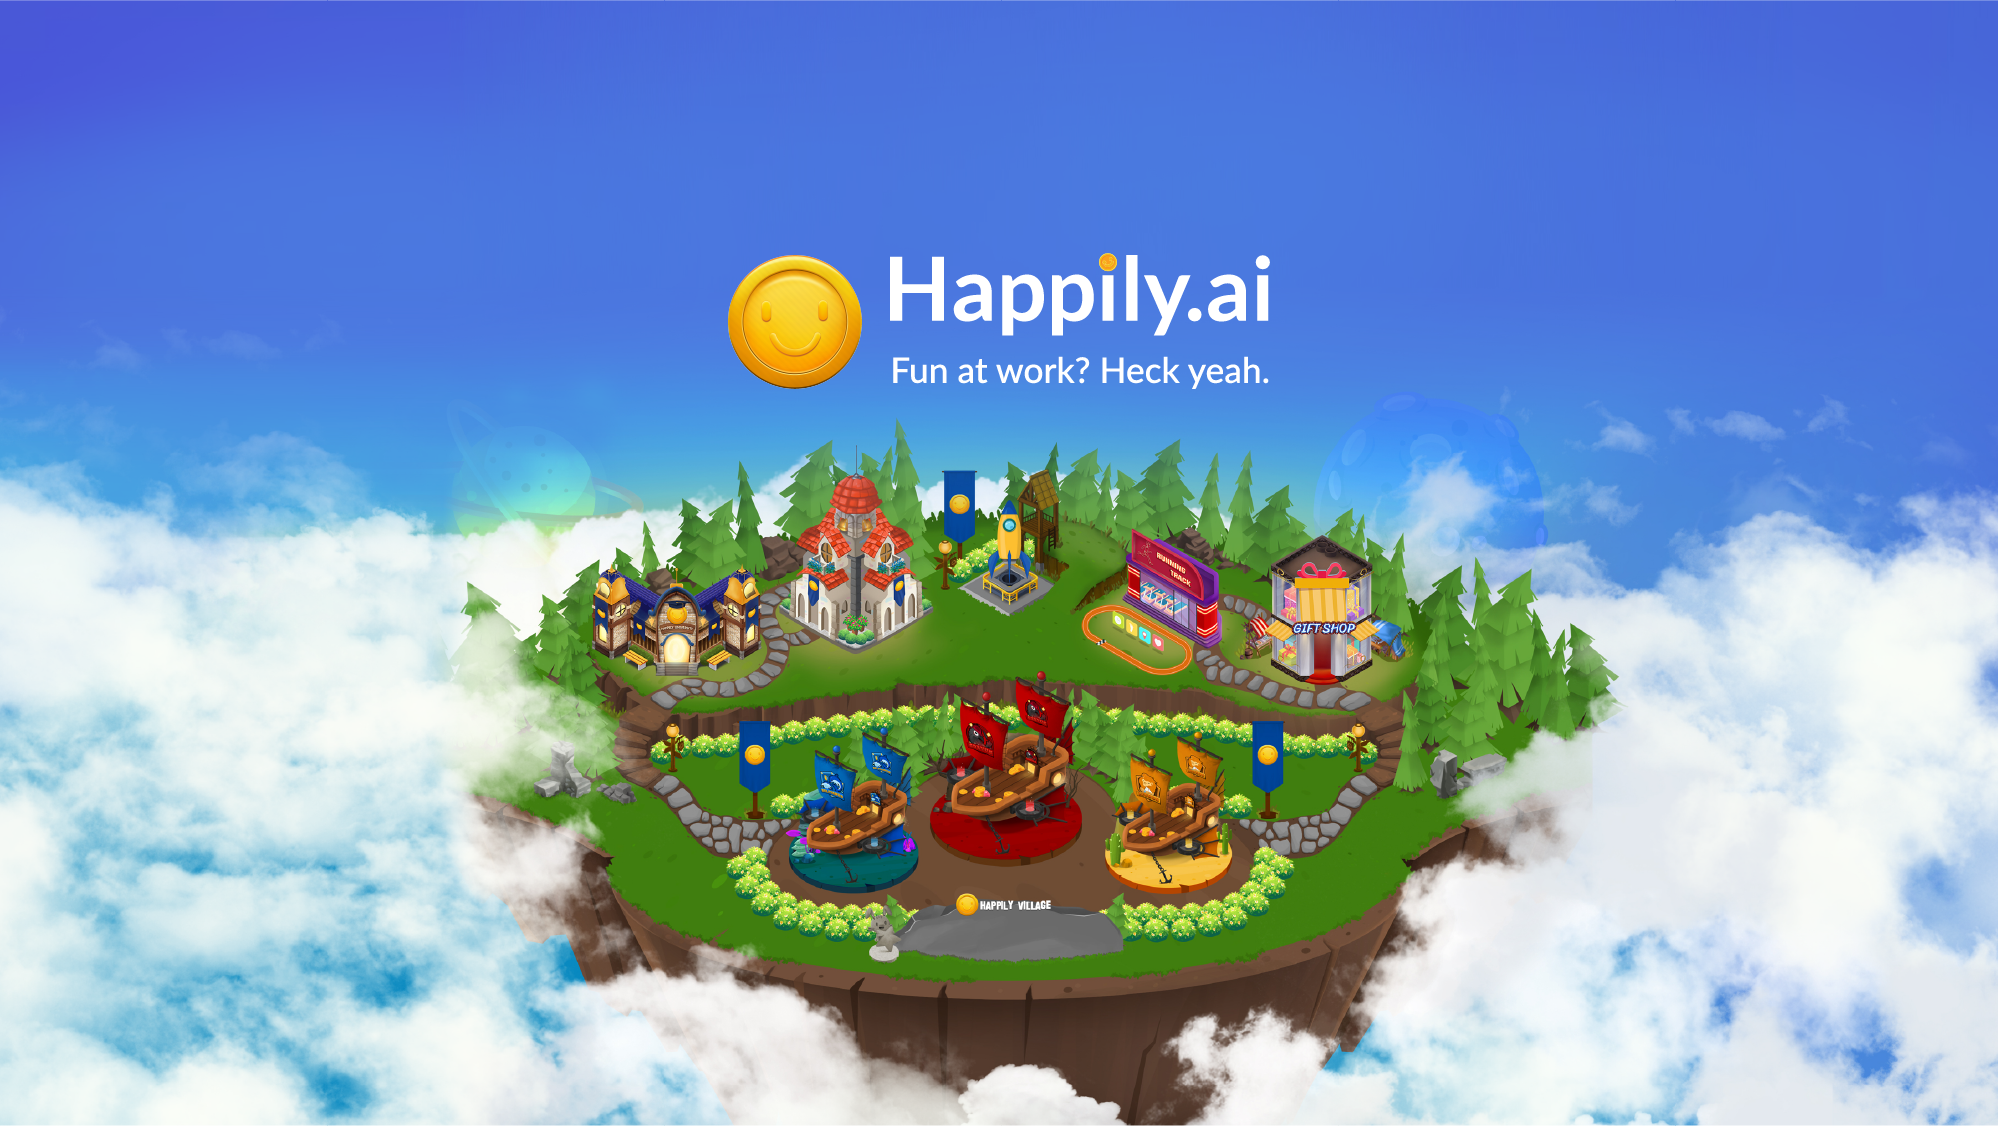 Virtual Workplace Community - Happily Village